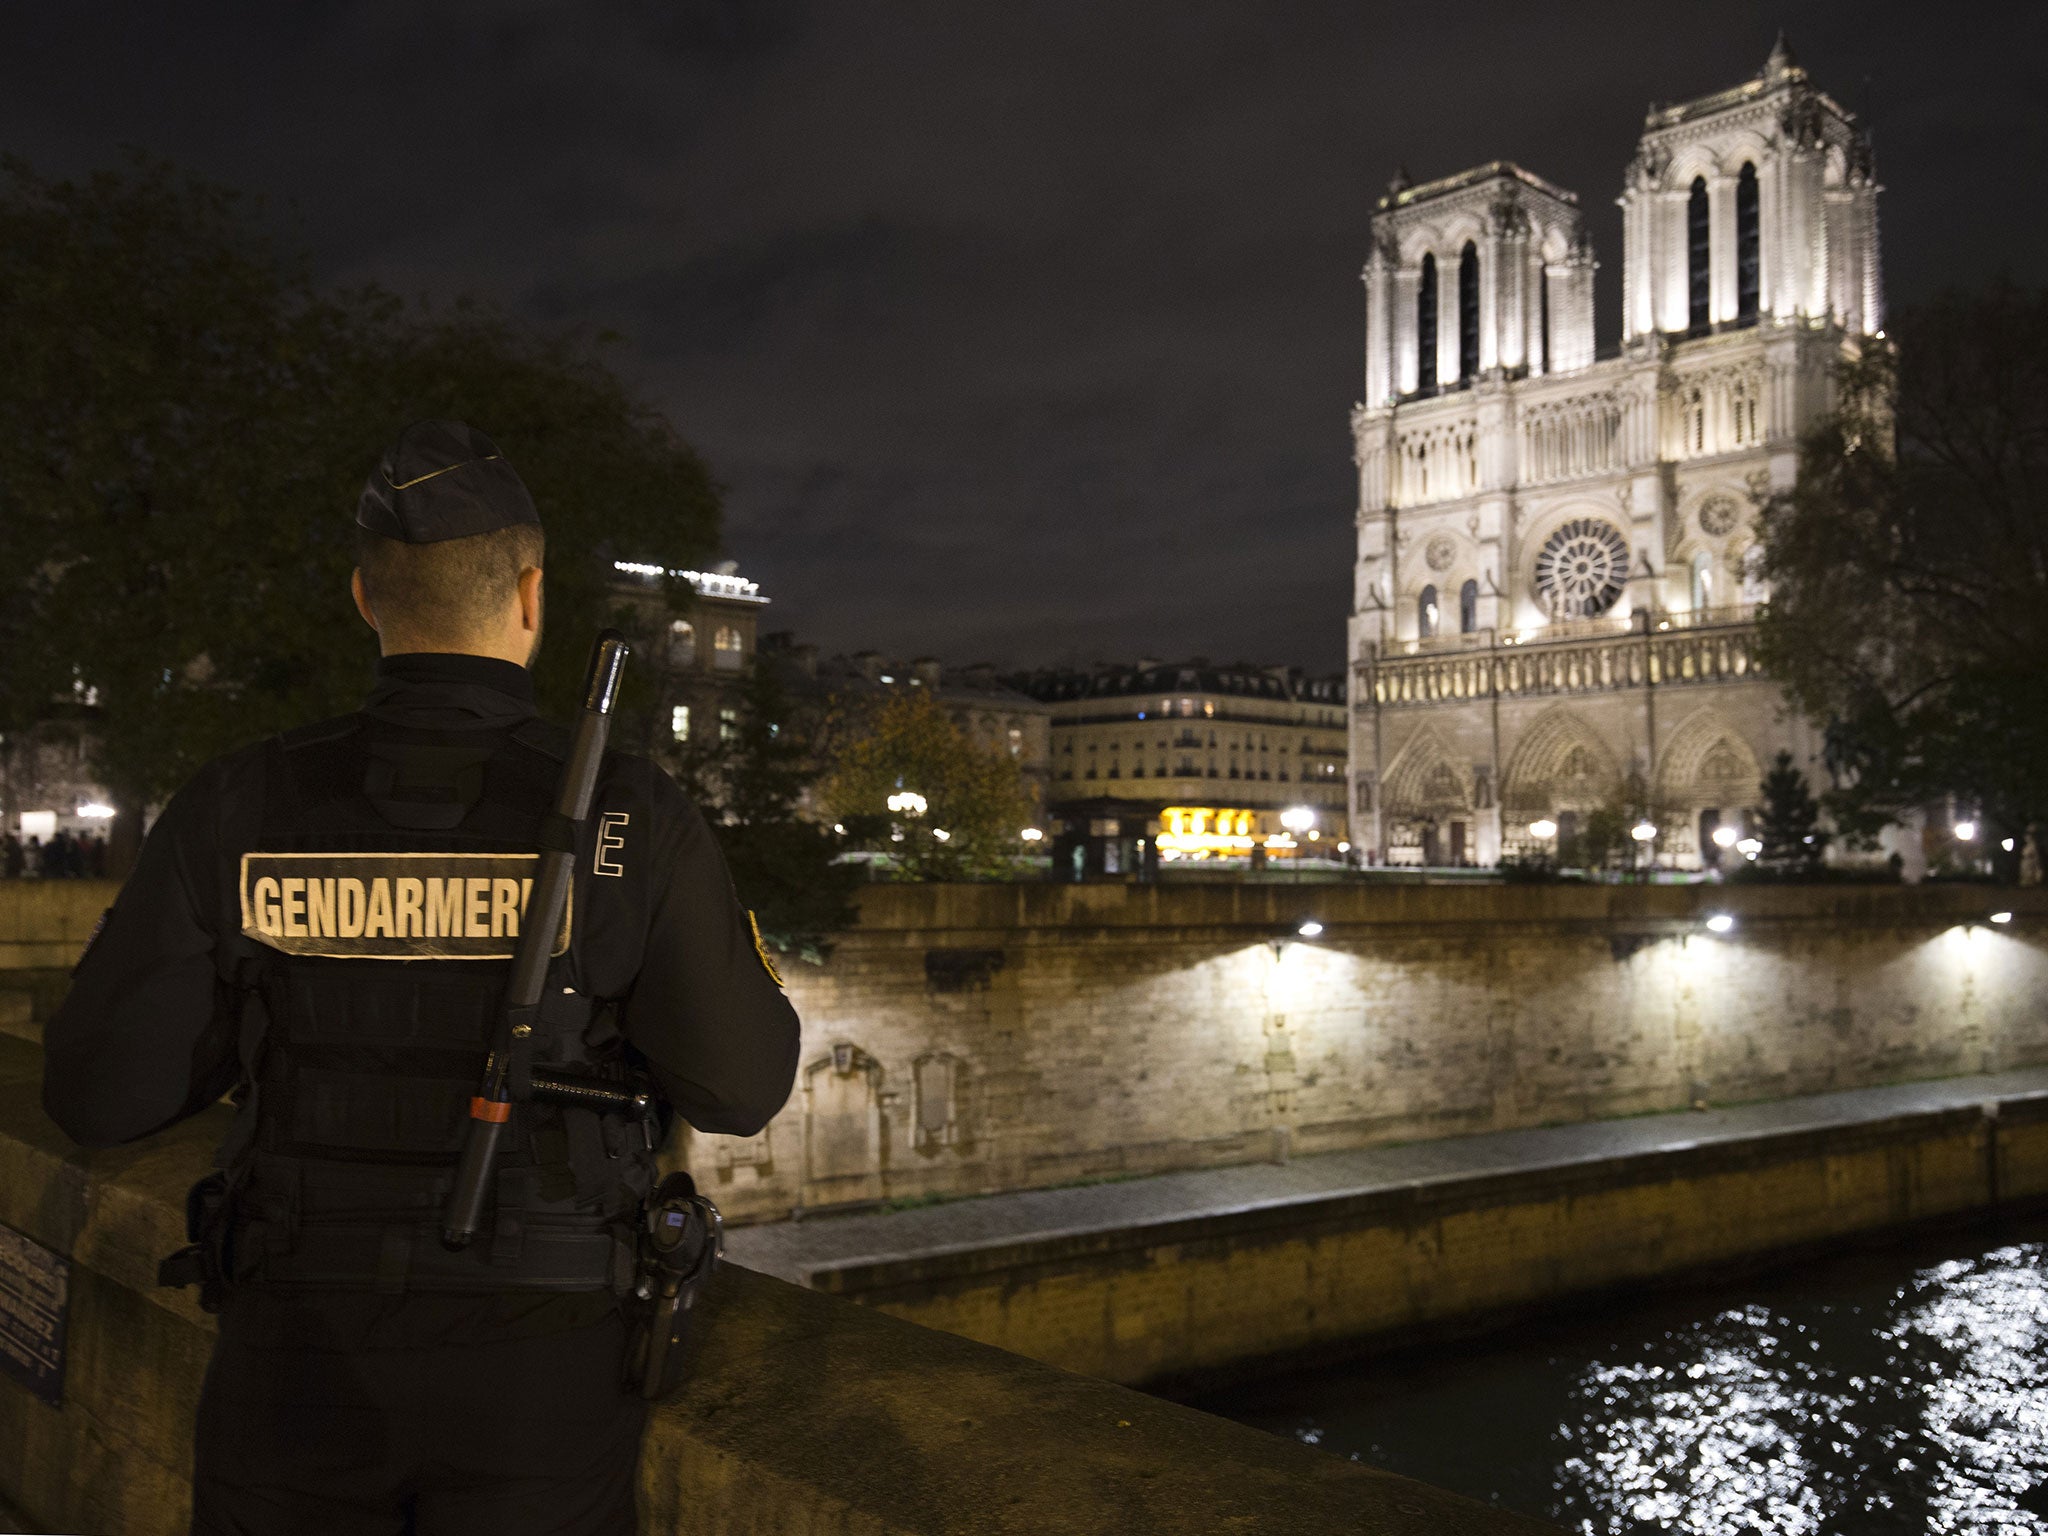 The country has been in a continuing state of emergency that started after Isis’ Paris attacks in November